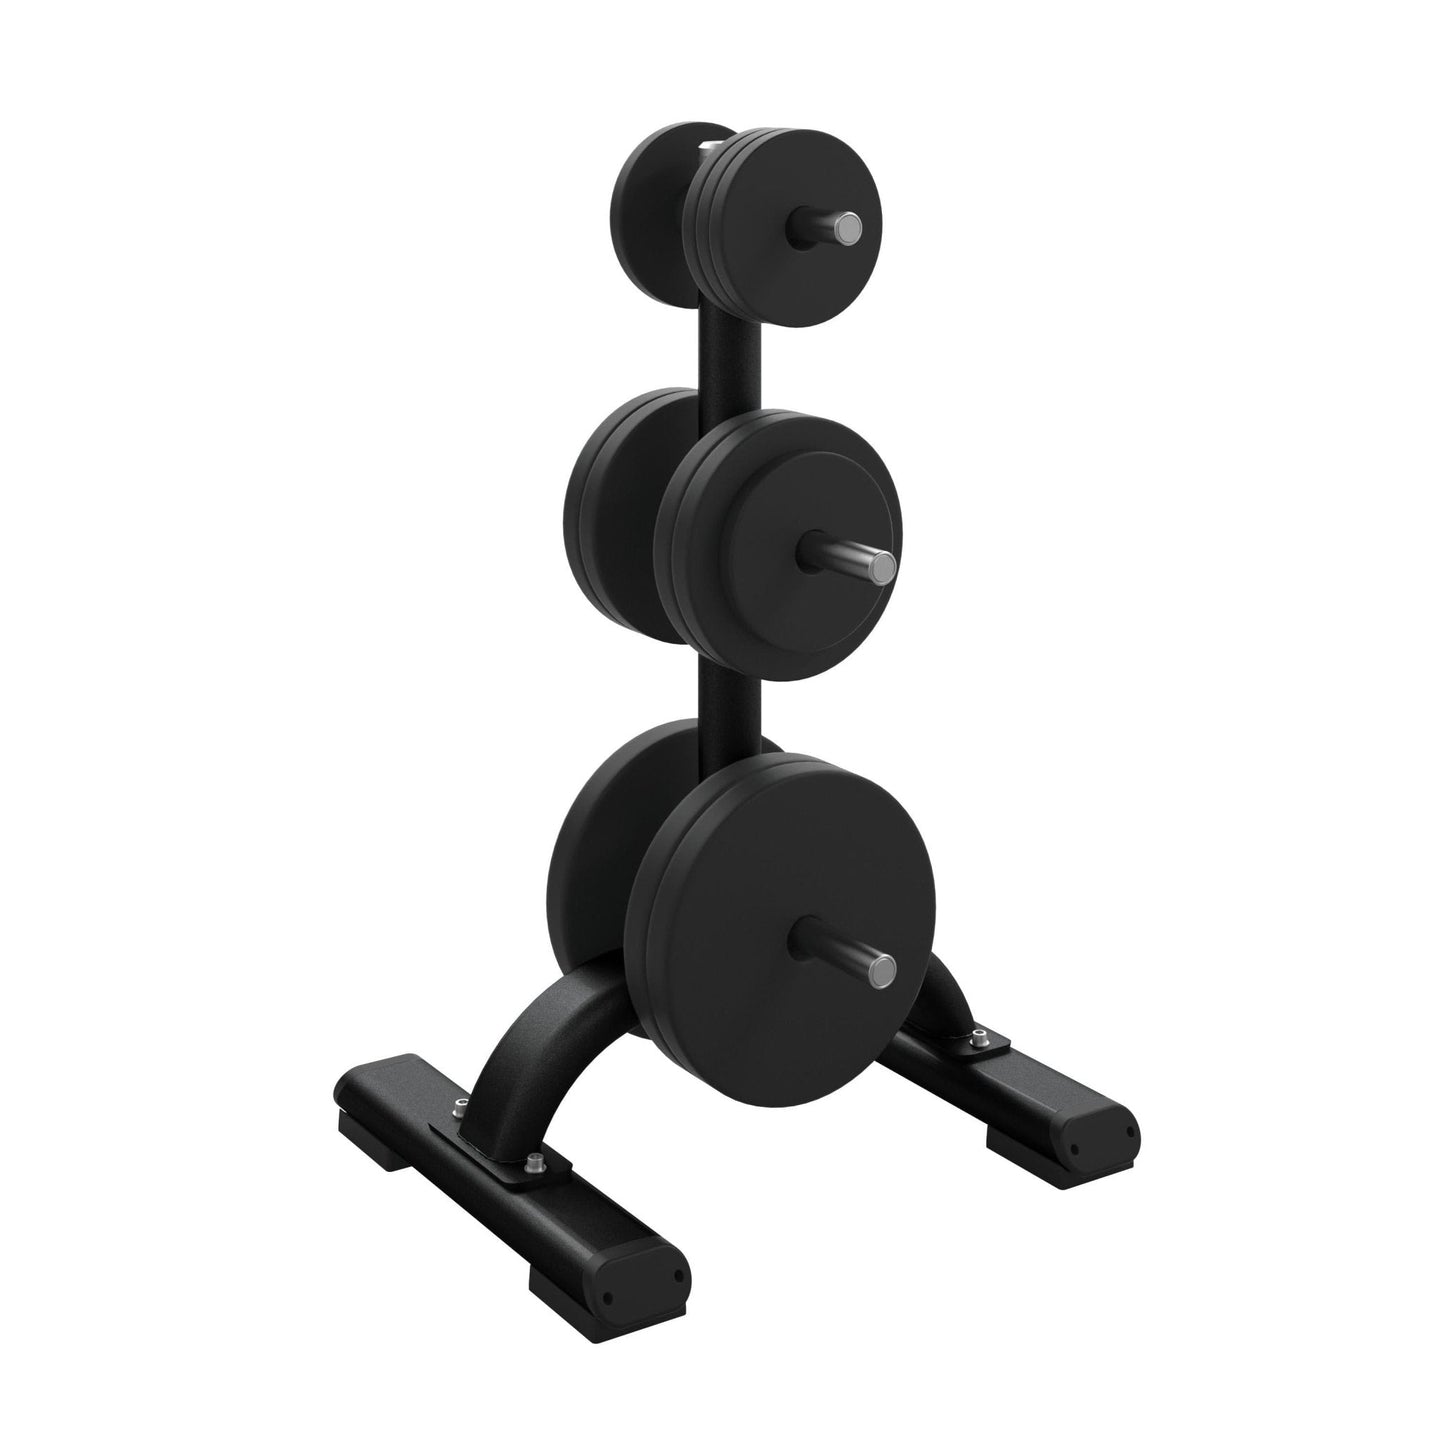 Precor Discovery Series Weight Plate Tree (DBR0817) Weight Storage Precor Black